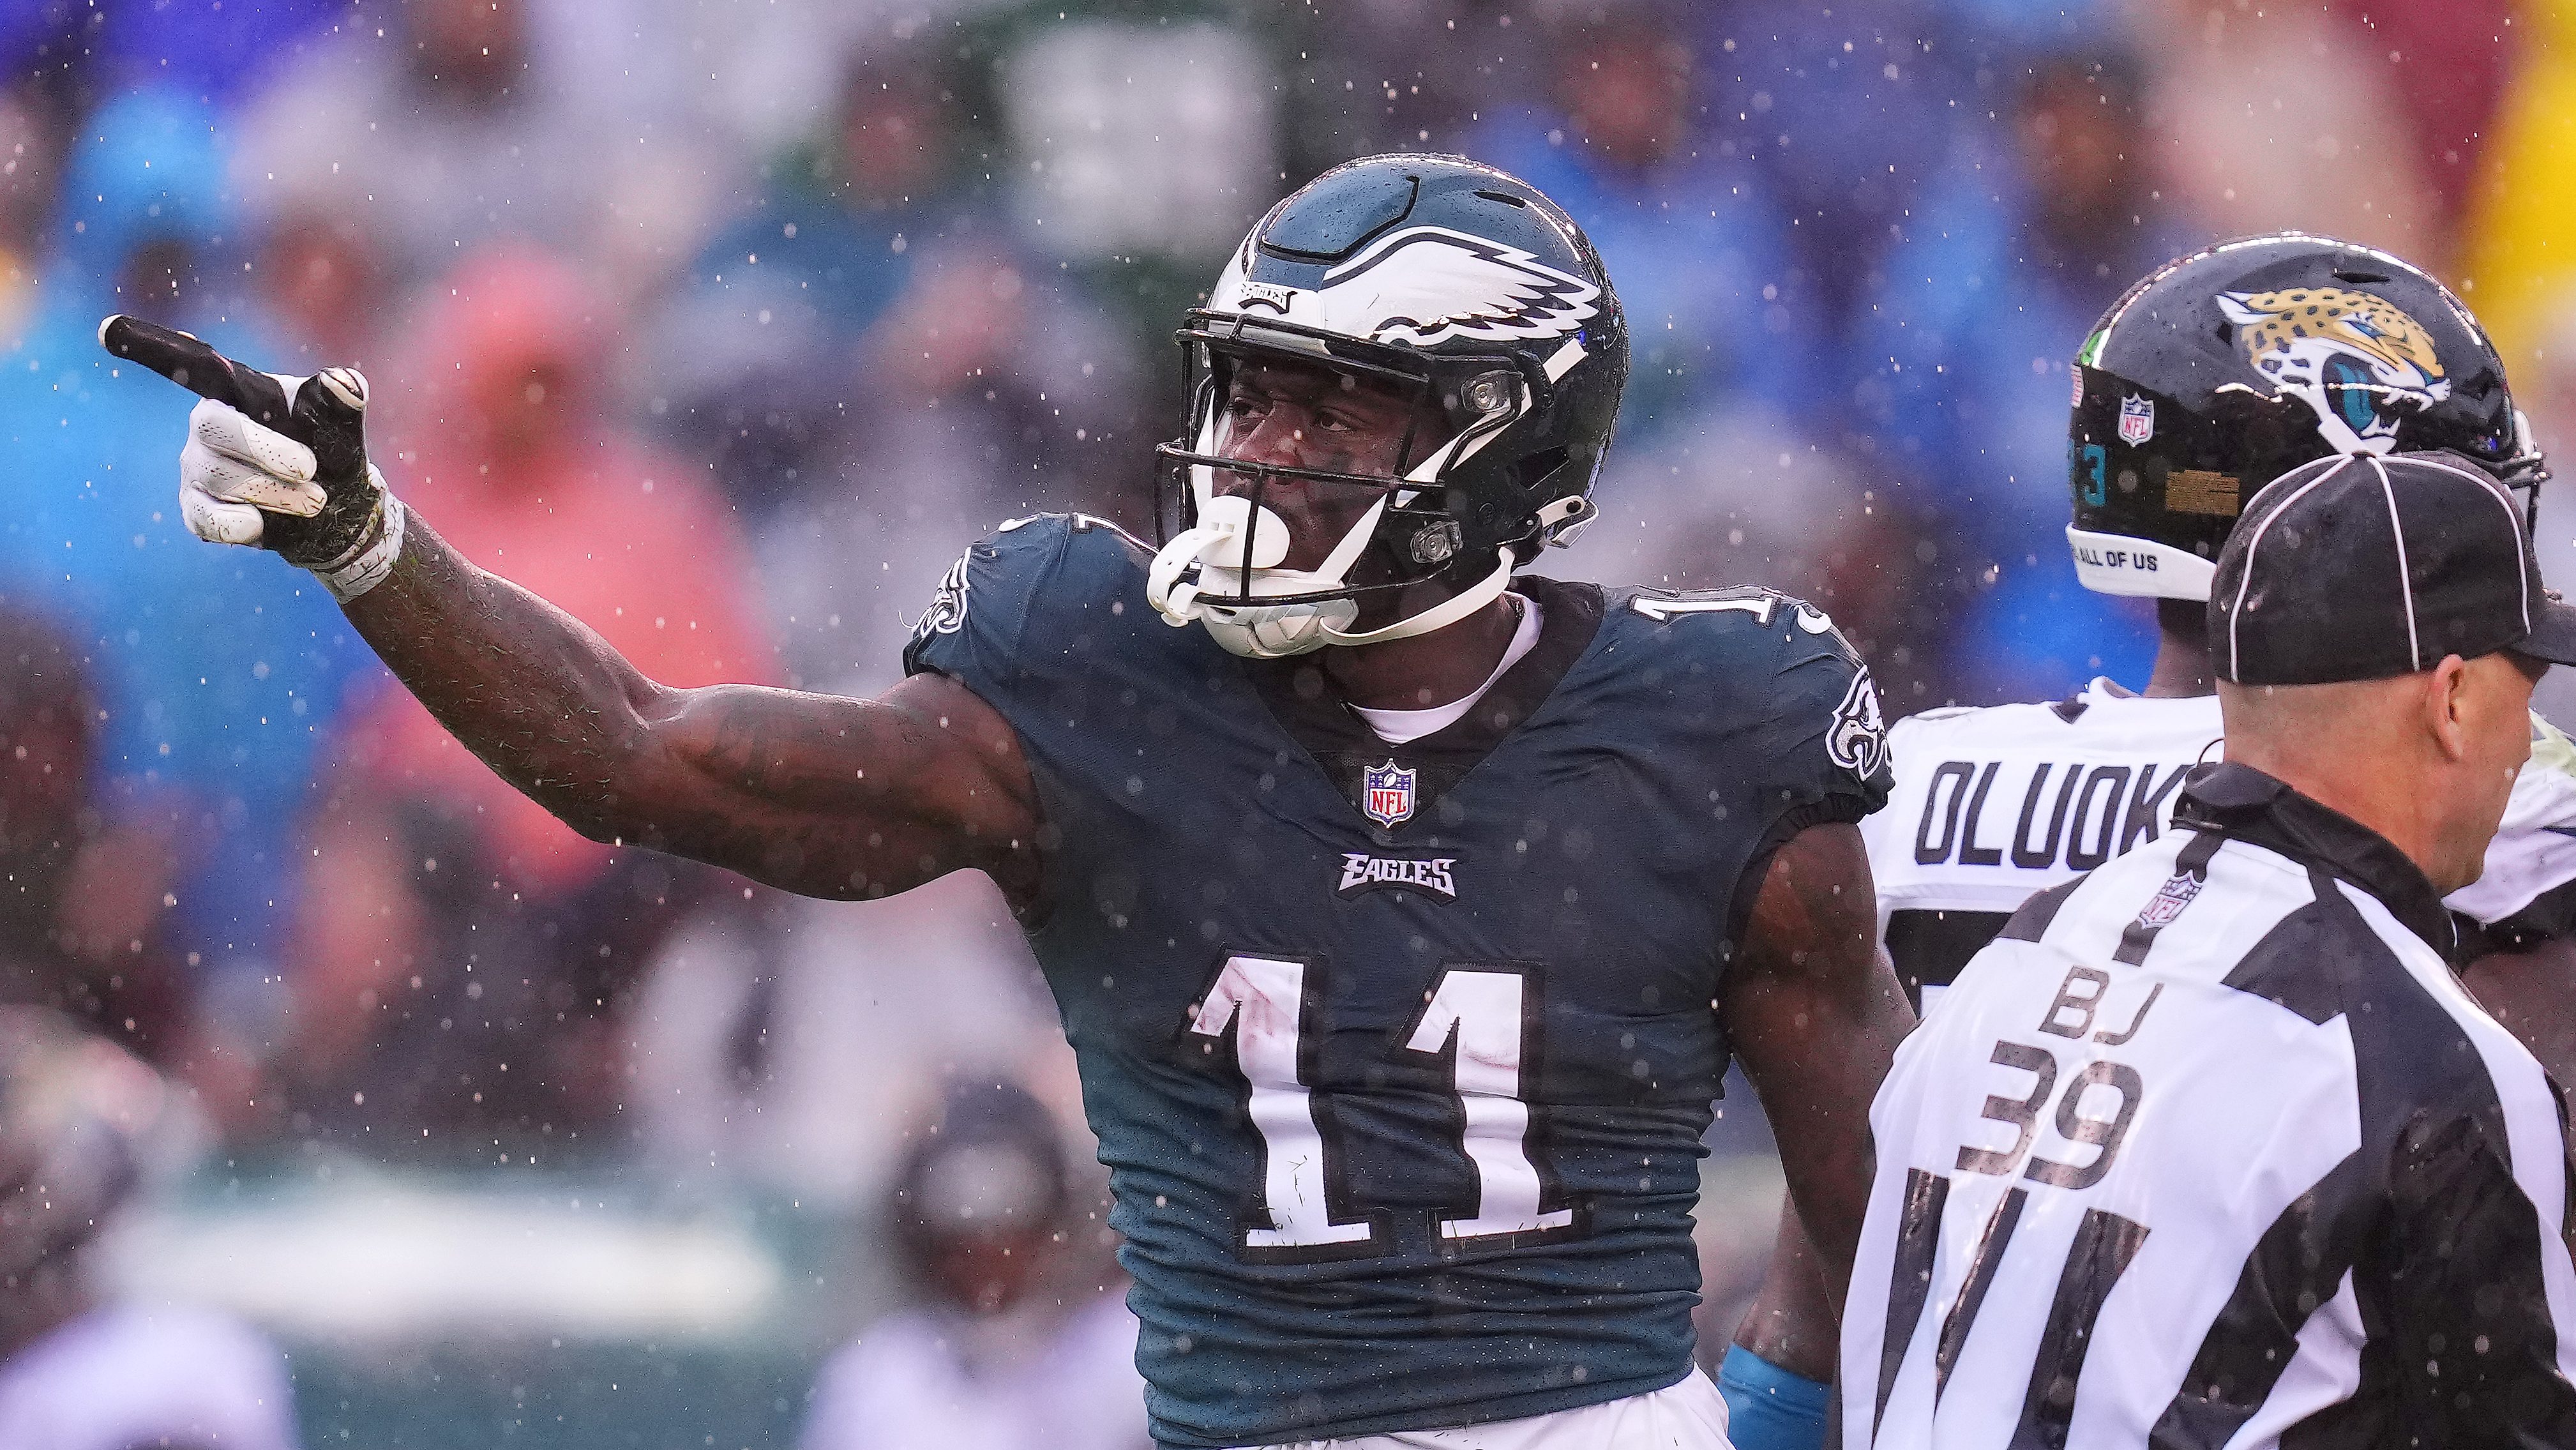 Eagles stay undefeated thanks to five Jaguars turnovers